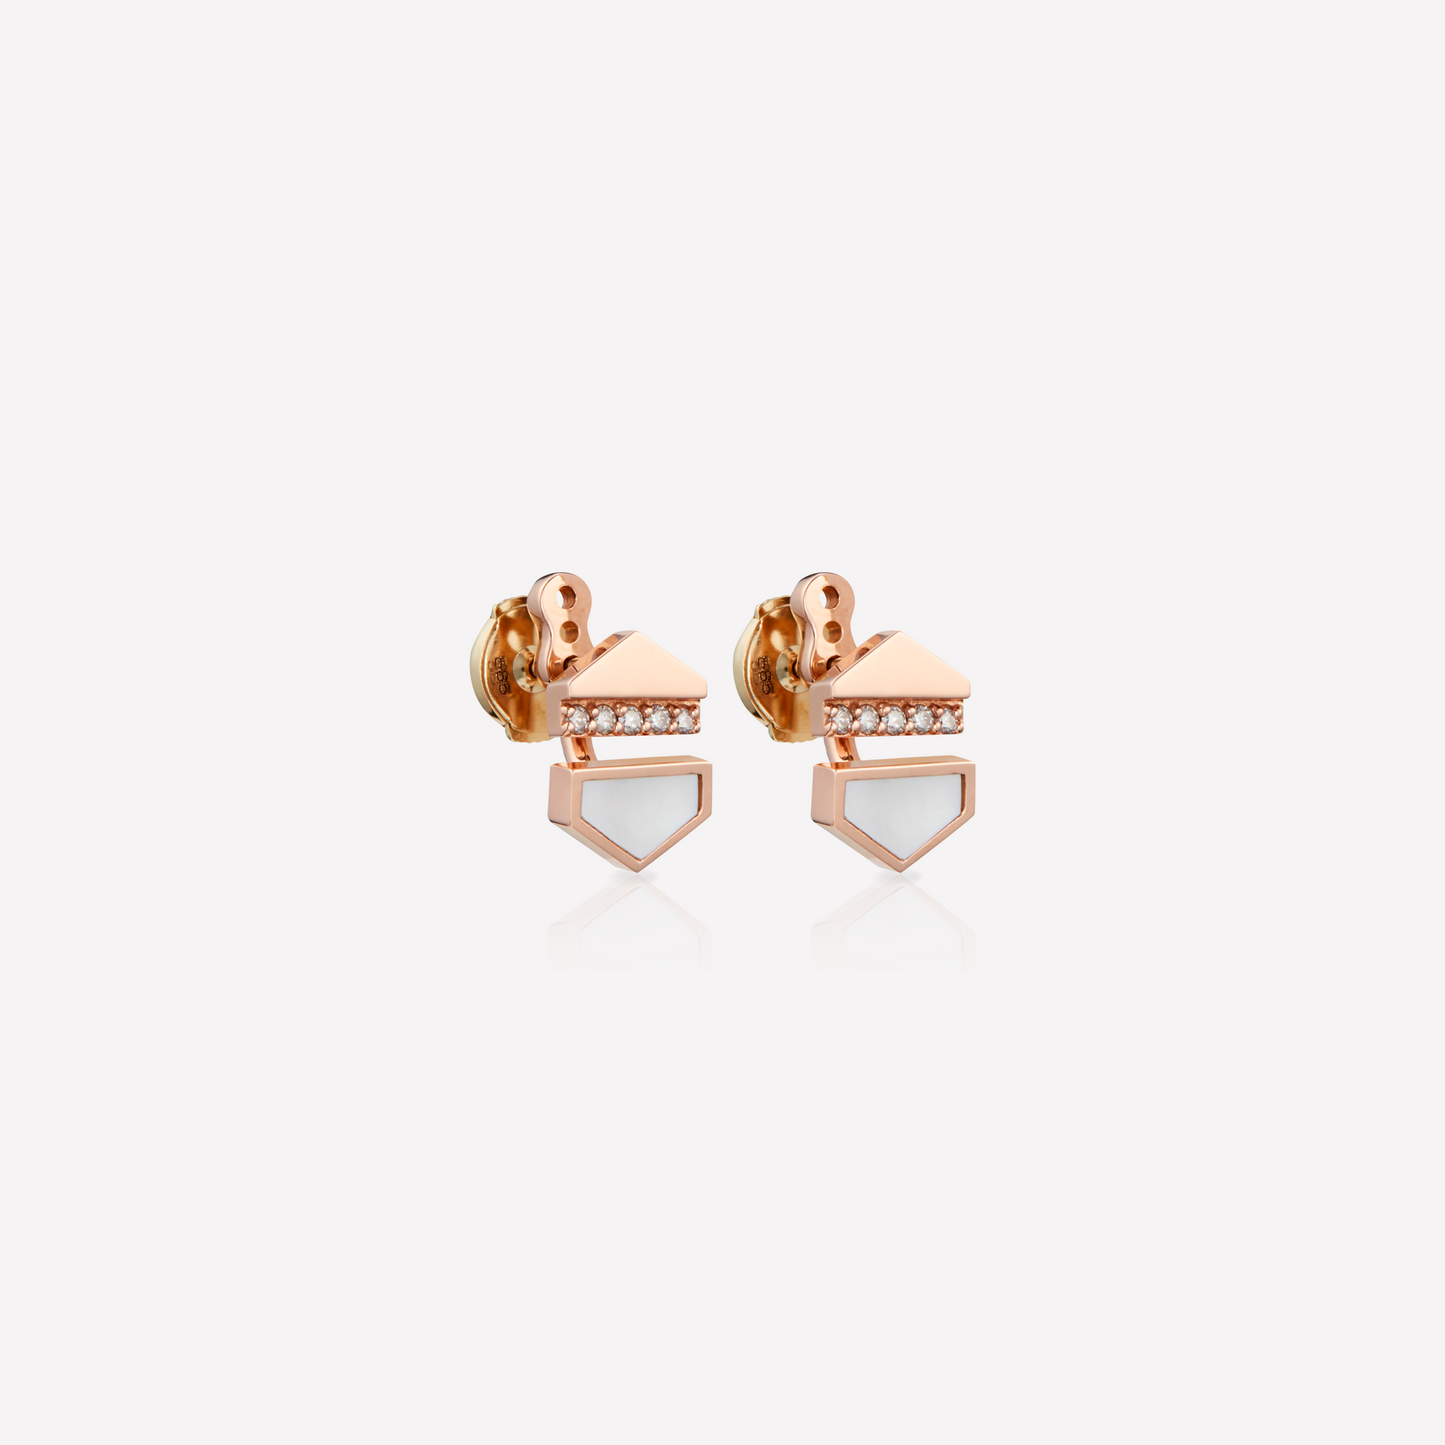 VOID Filled By You Earrings, Small, White Nacre, Diamond